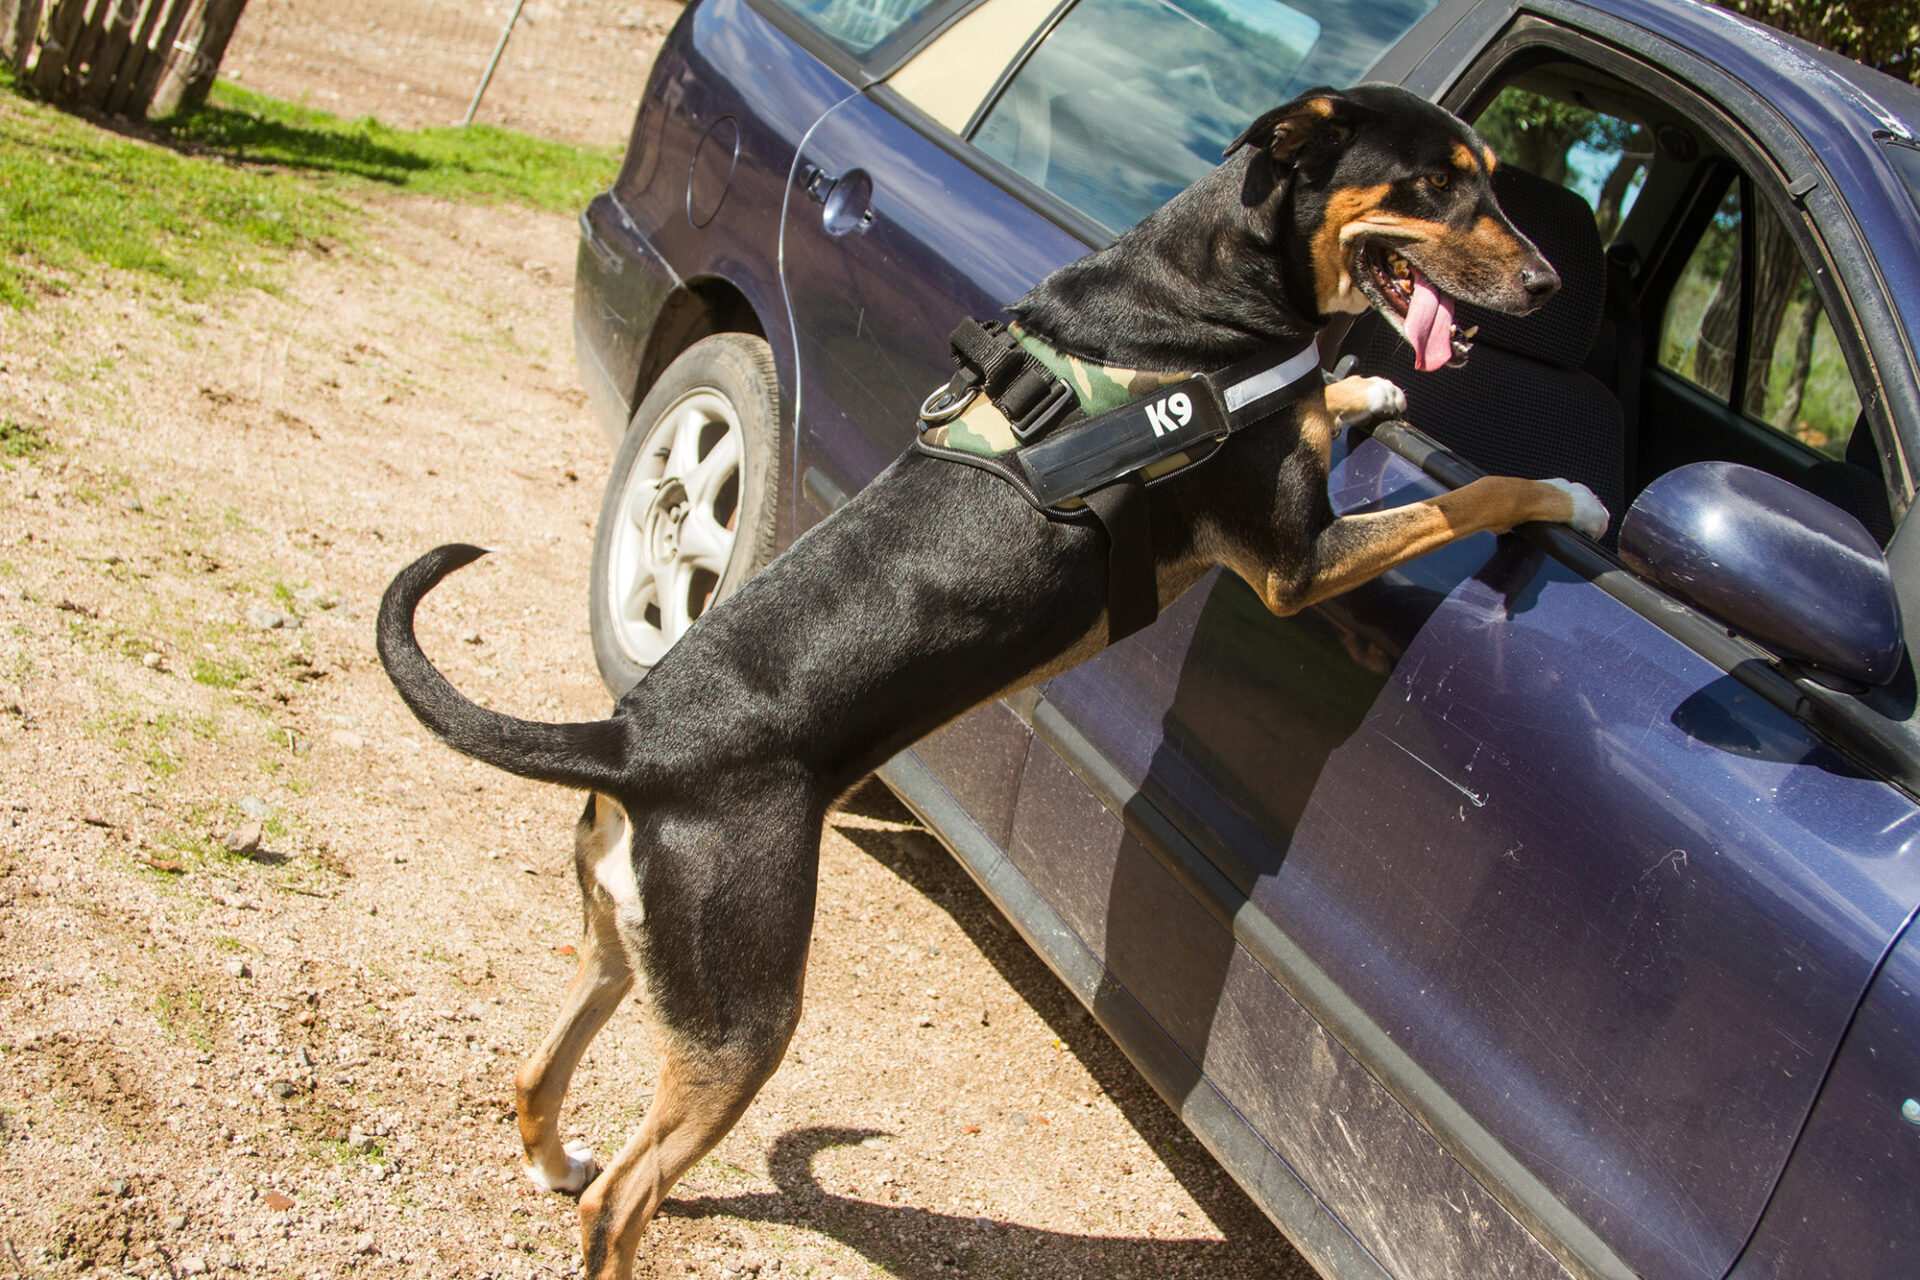 Police dog conducted an illegal search, Idaho justices said. What the US Supreme Court ruled